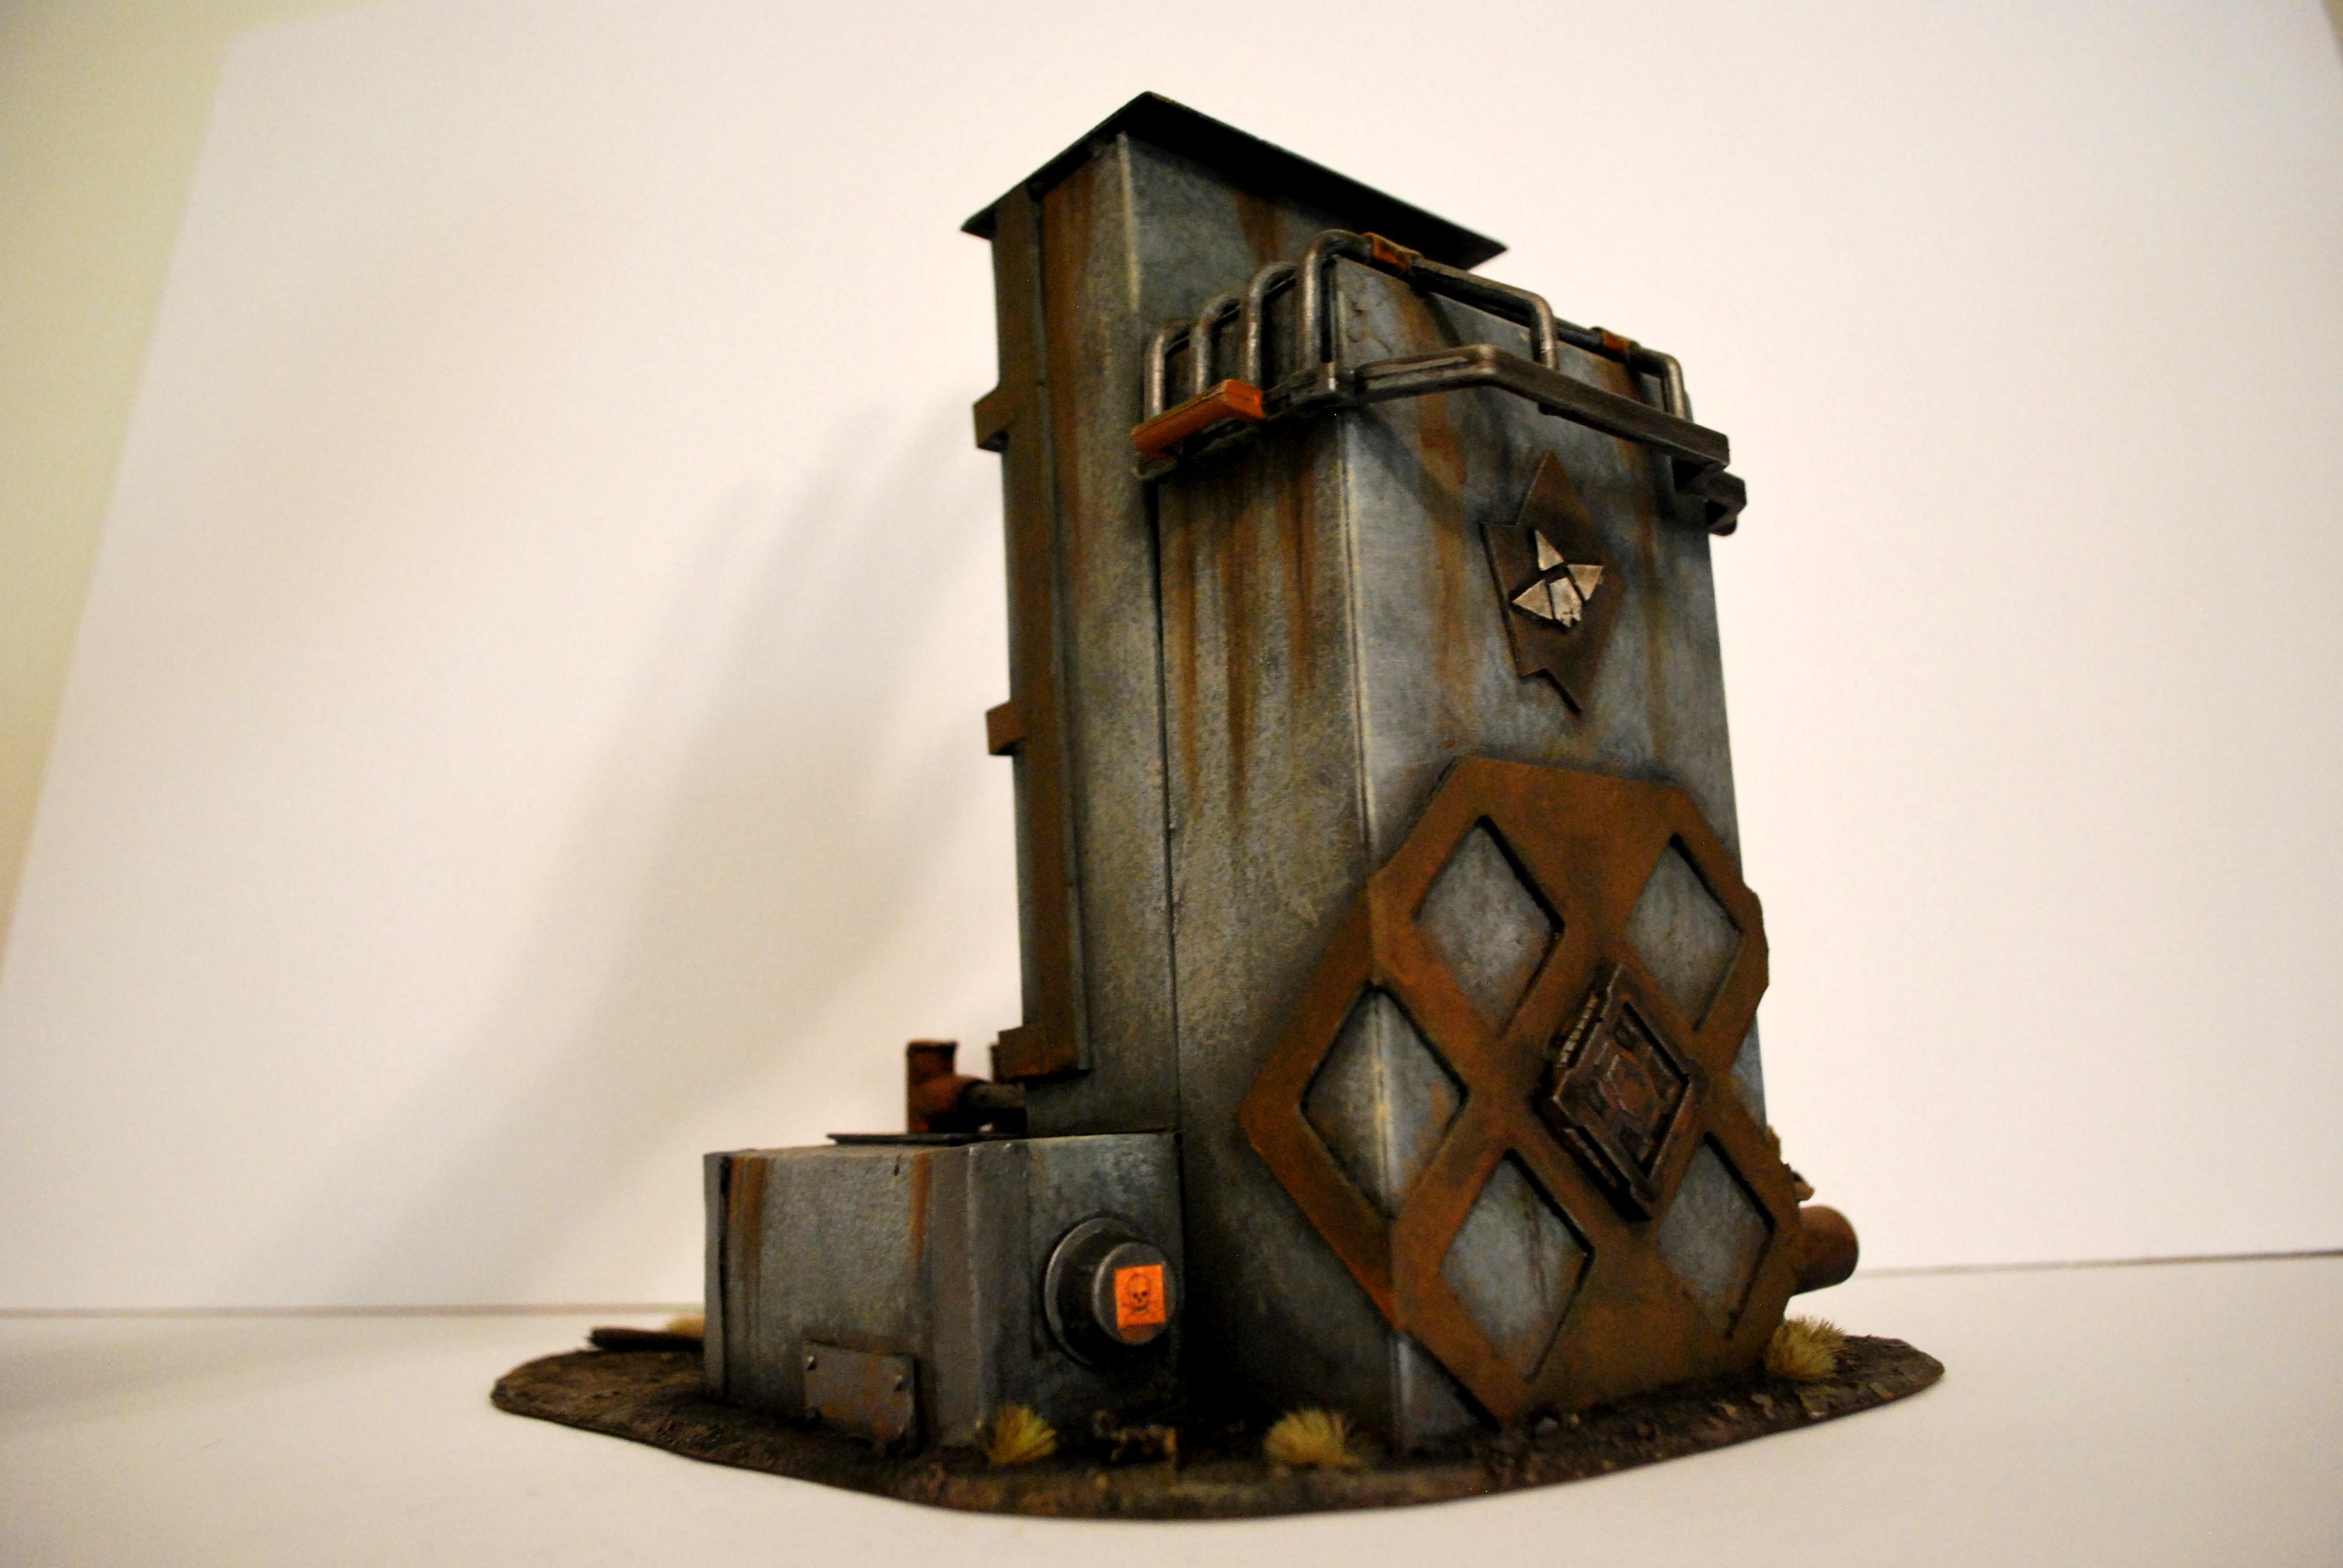 Buildings, Commission, Fallout, Industrial, Post Apoc, Ruins, Scratch Build, Terrain, This Is Not A Test